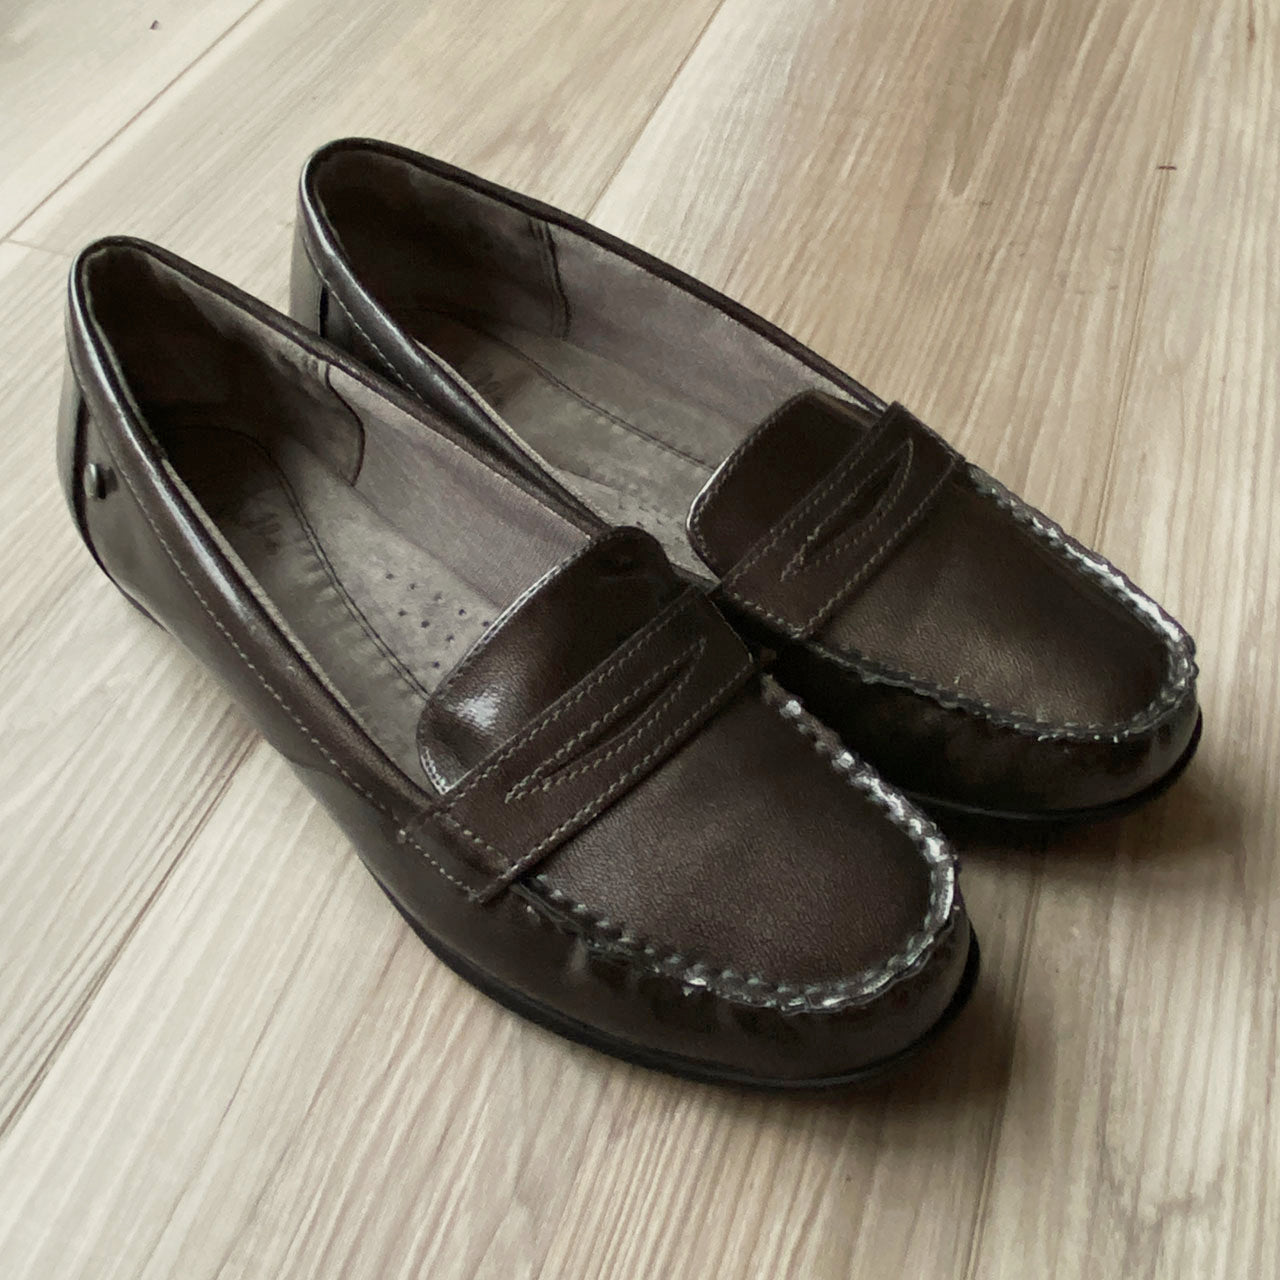 Life-Stride-Penny-Loafer-Driver-Size-8M_-Brown-Patent-Leather_-side-view-2-shop-eBargainsAndDeals.com